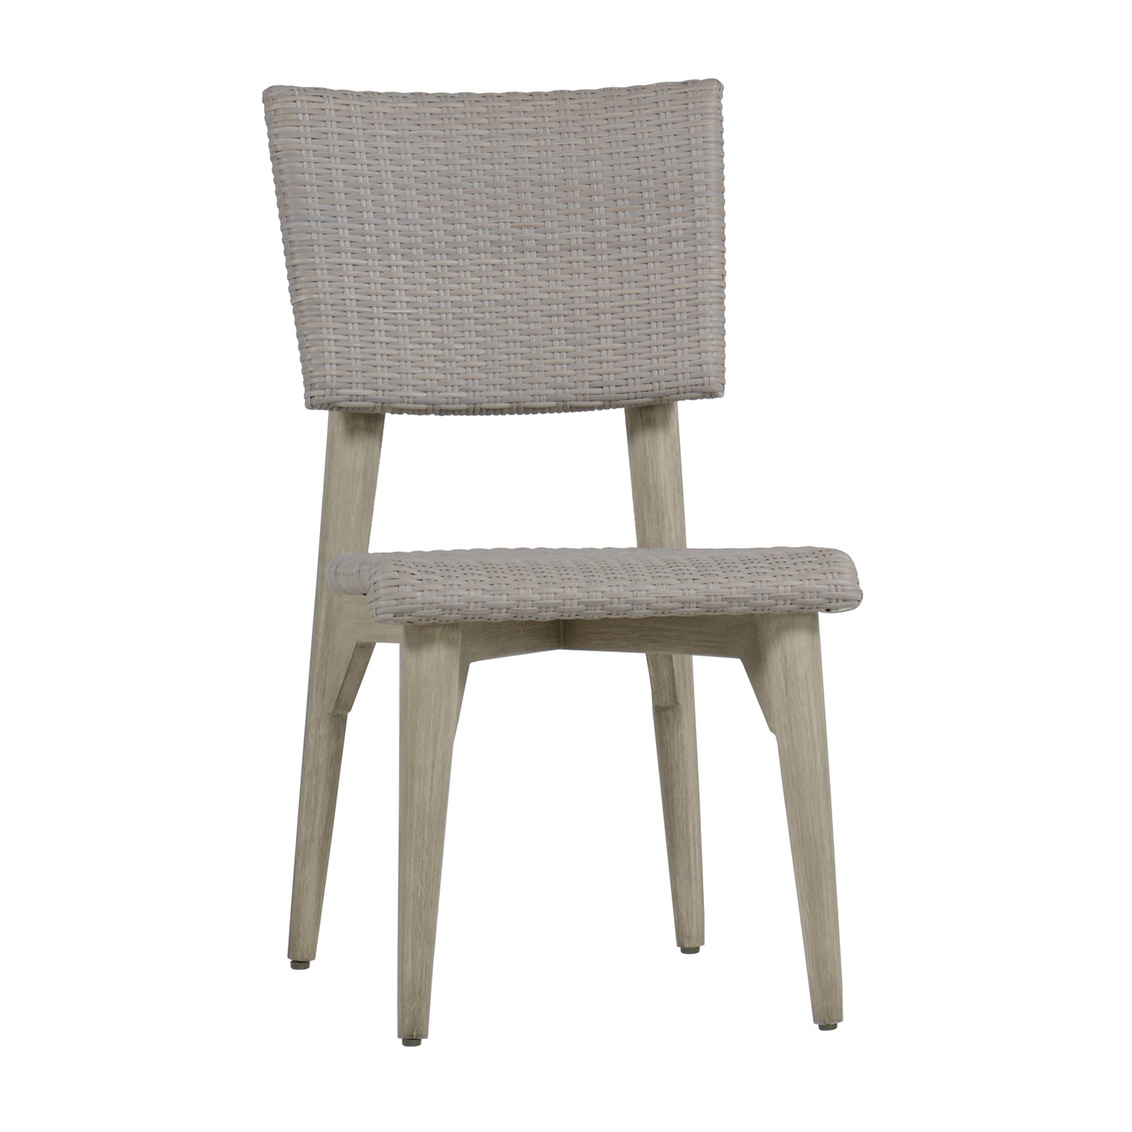 wind side chair in oyster/ oyster – frame only product image